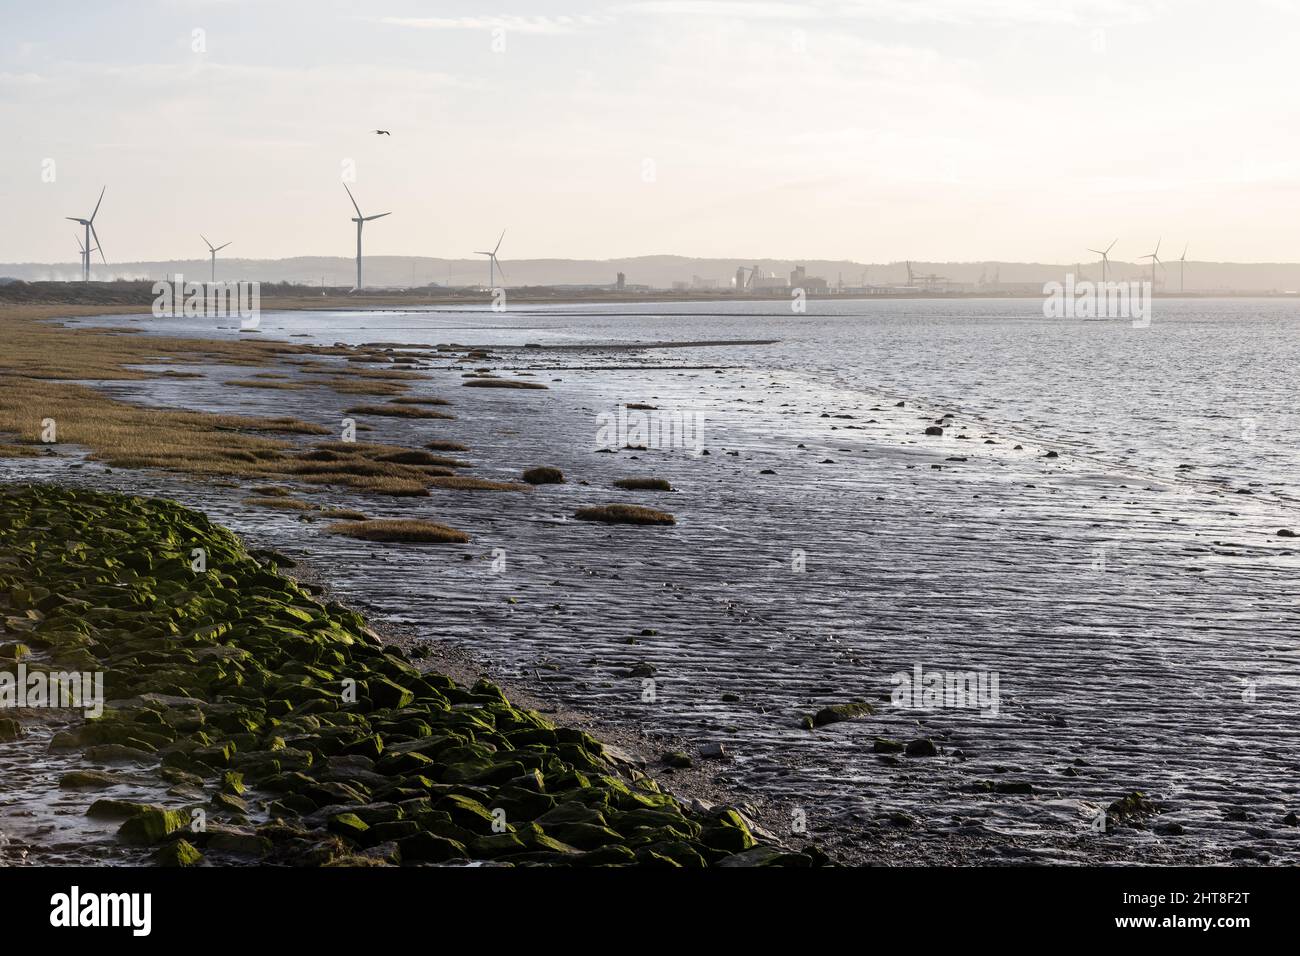 Mud flats are revealed at low tide at Severn Beach on the Bristol Channel, with the wind turbined and industrial facilities of Avonmouth Docks behind. Stock Photo